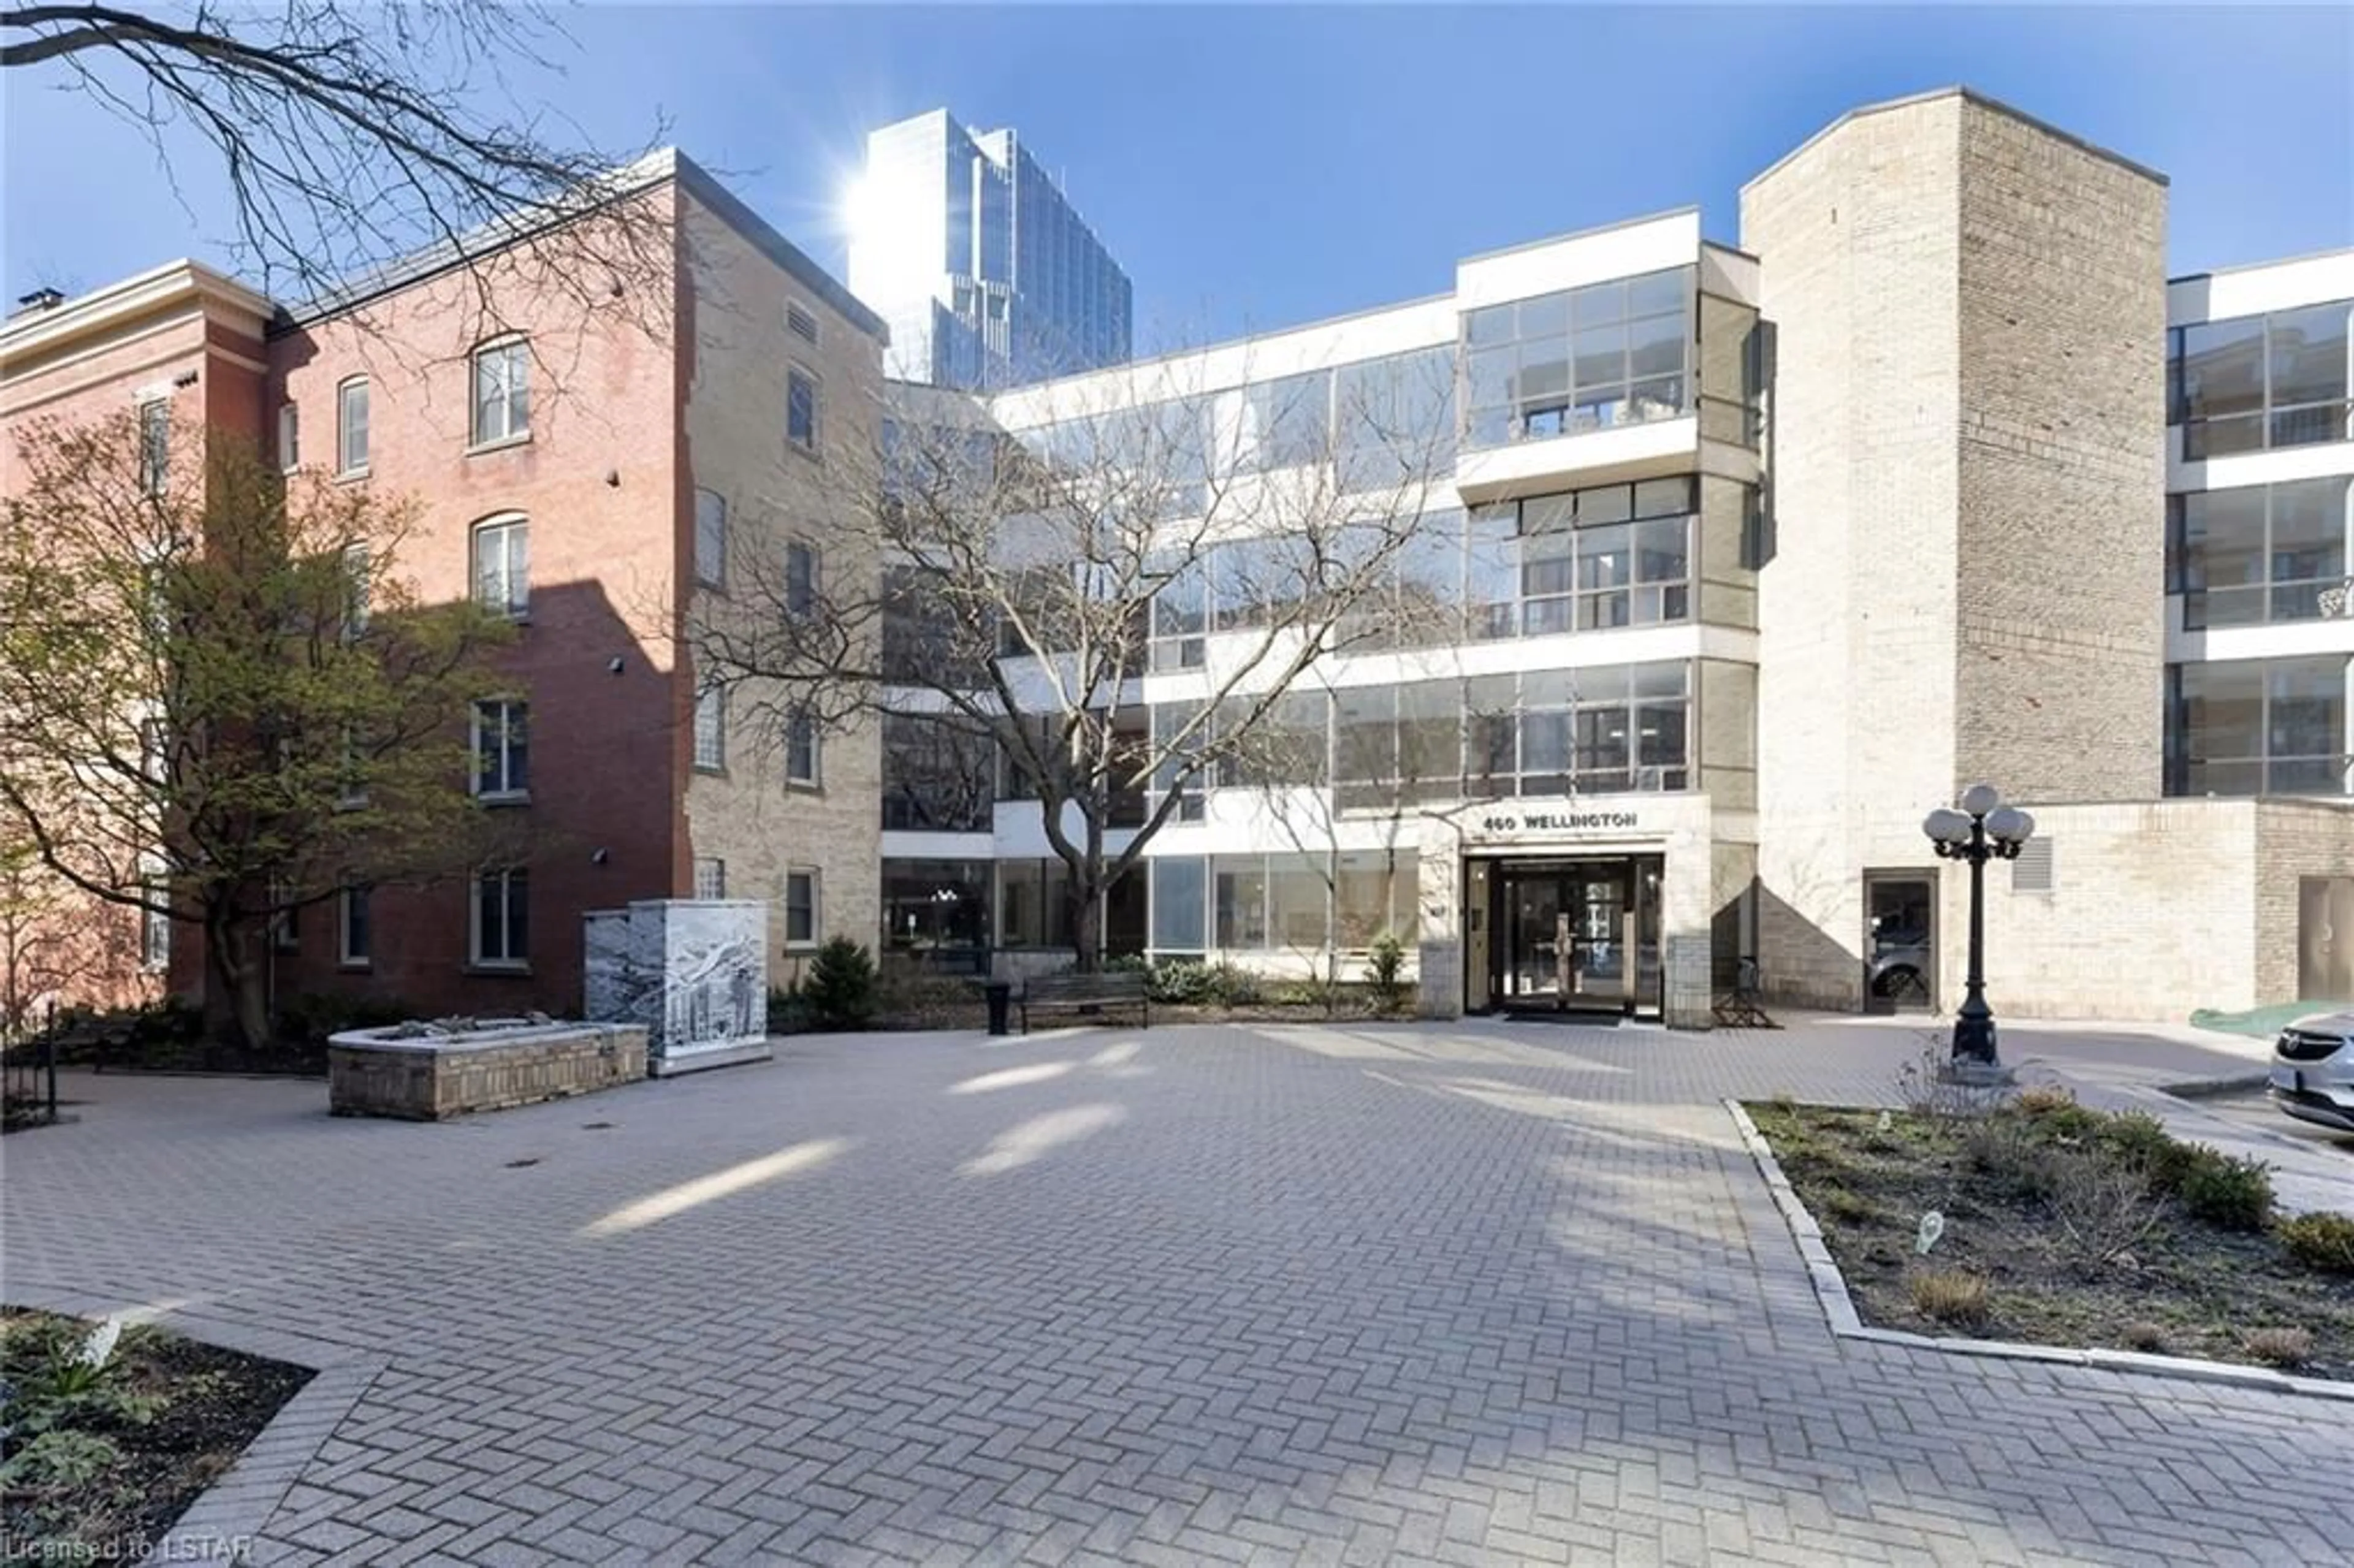 Outside view for 460 Wellington St #407, London Ontario N6A 3P8